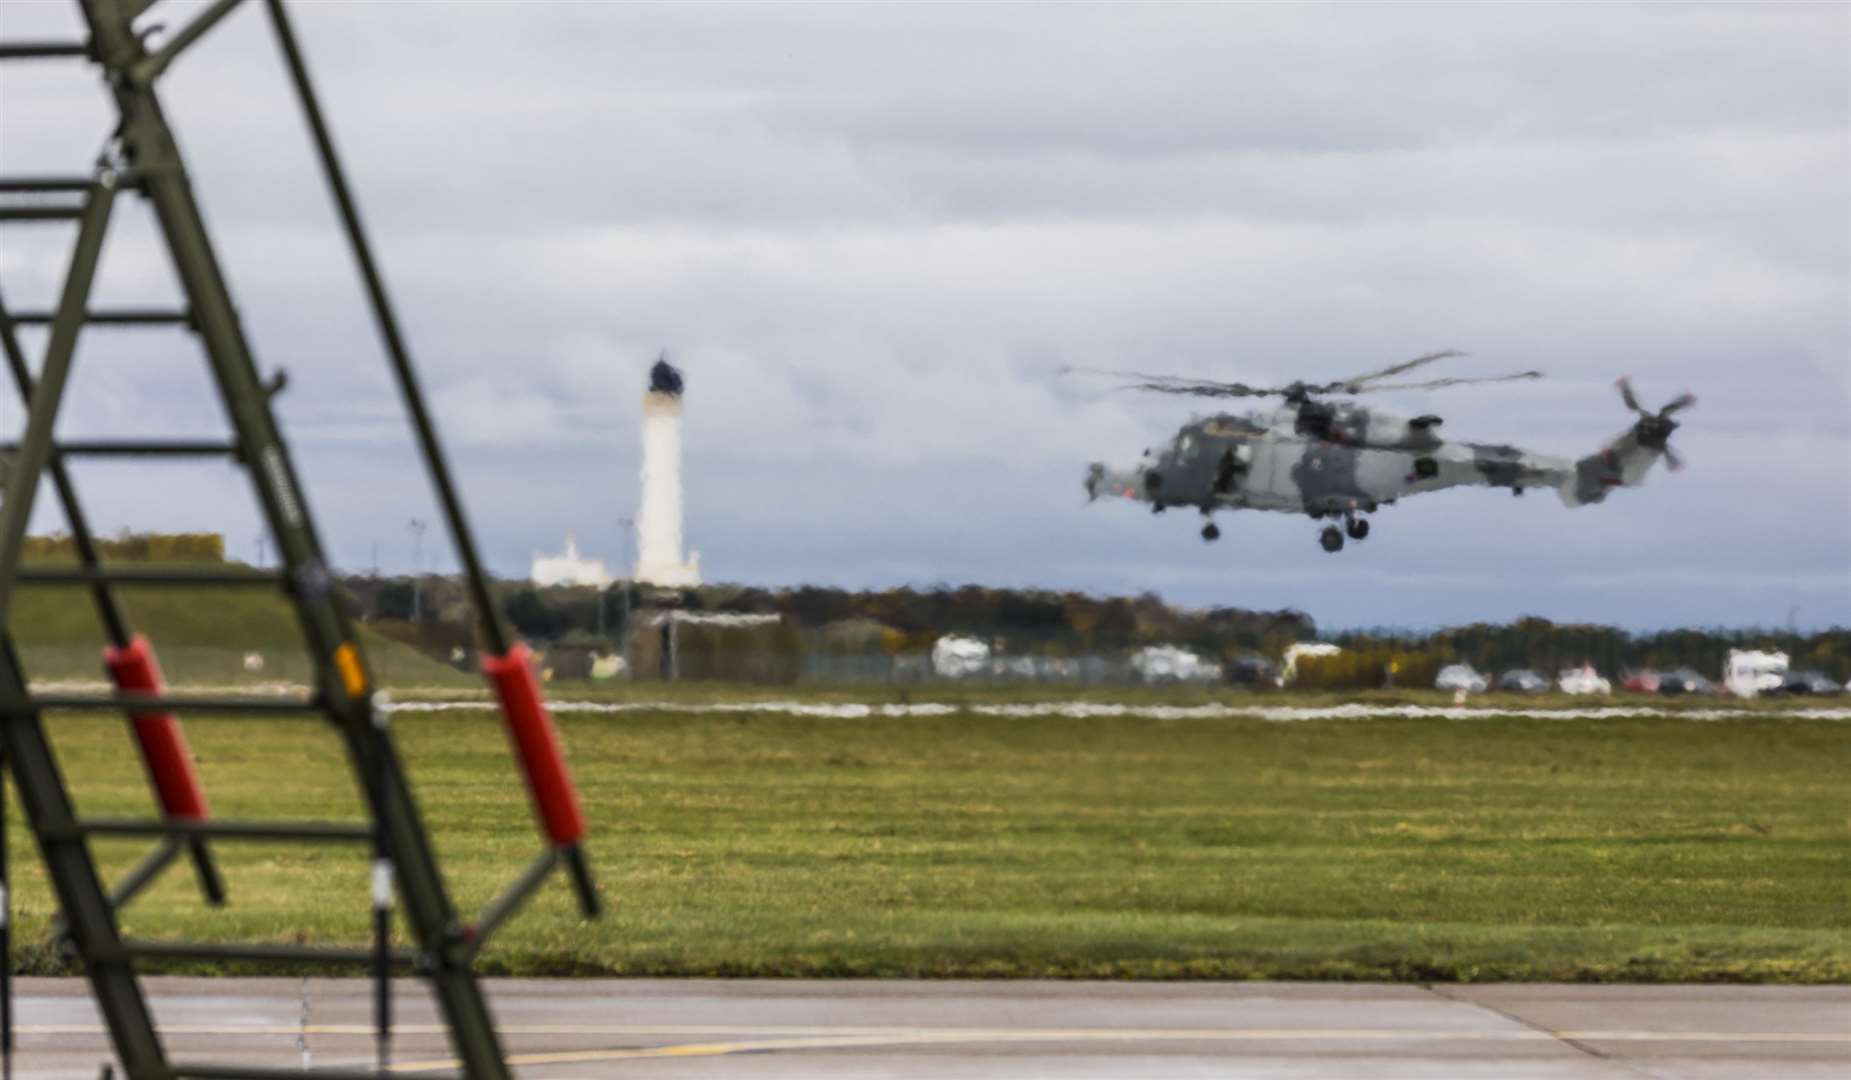 Image shows a Royal Navy Wildcat Helicopter lost in the eflux of a taxiing Typhoon at RAF Lossiemouth, 4th Apr 2019. The Wildcats of 847 Naval Air Squadron are at RAF Lossiemouth as part Ex JOINT WARRIOR, the largest Tri-service exercise also including other nations. Originator: WO 1 Sqn Section: 1 Sqn Ext: 6361 *For more information contact Photographic Section, RAF Lossiemouth, IV31 6SD. Tel: 01343 817191